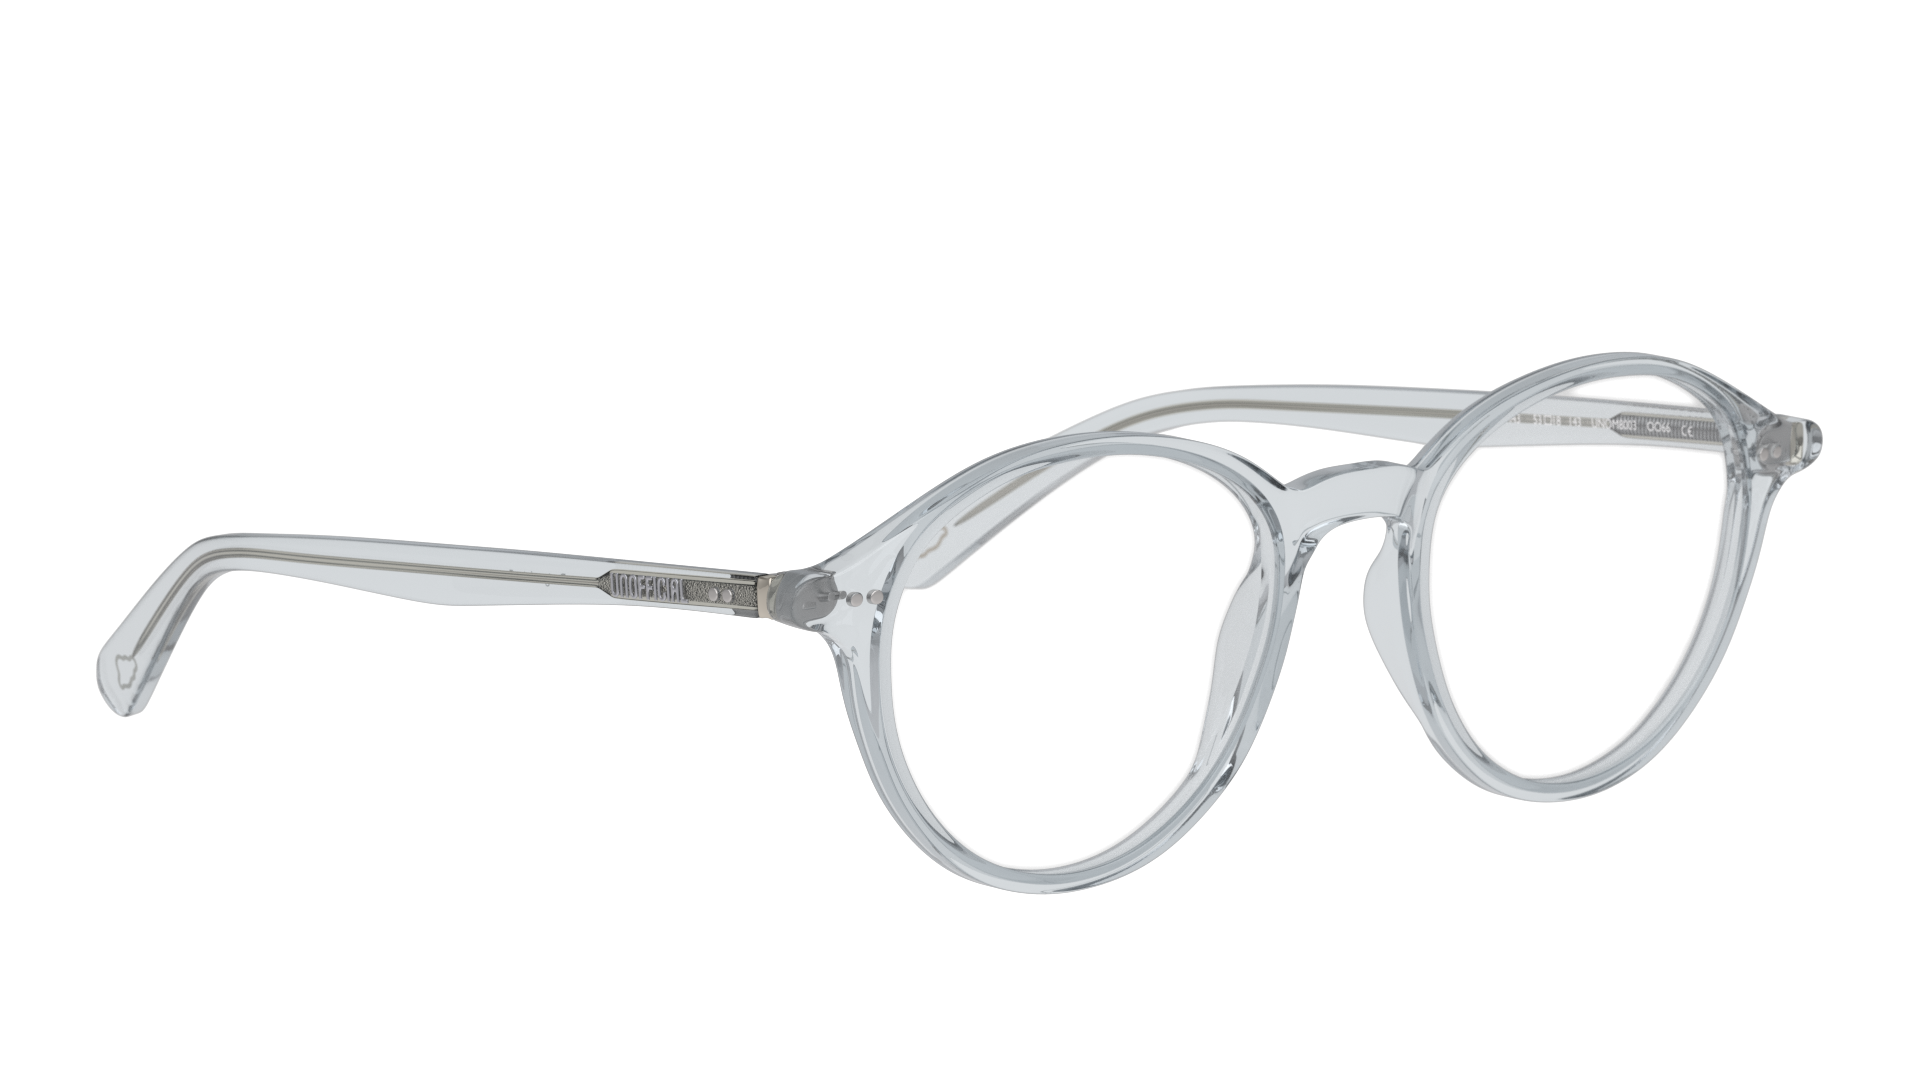 Angle_Right01 Unofficial UNOM0185 (GG00) Glasses Transparent / Transparent, Grey